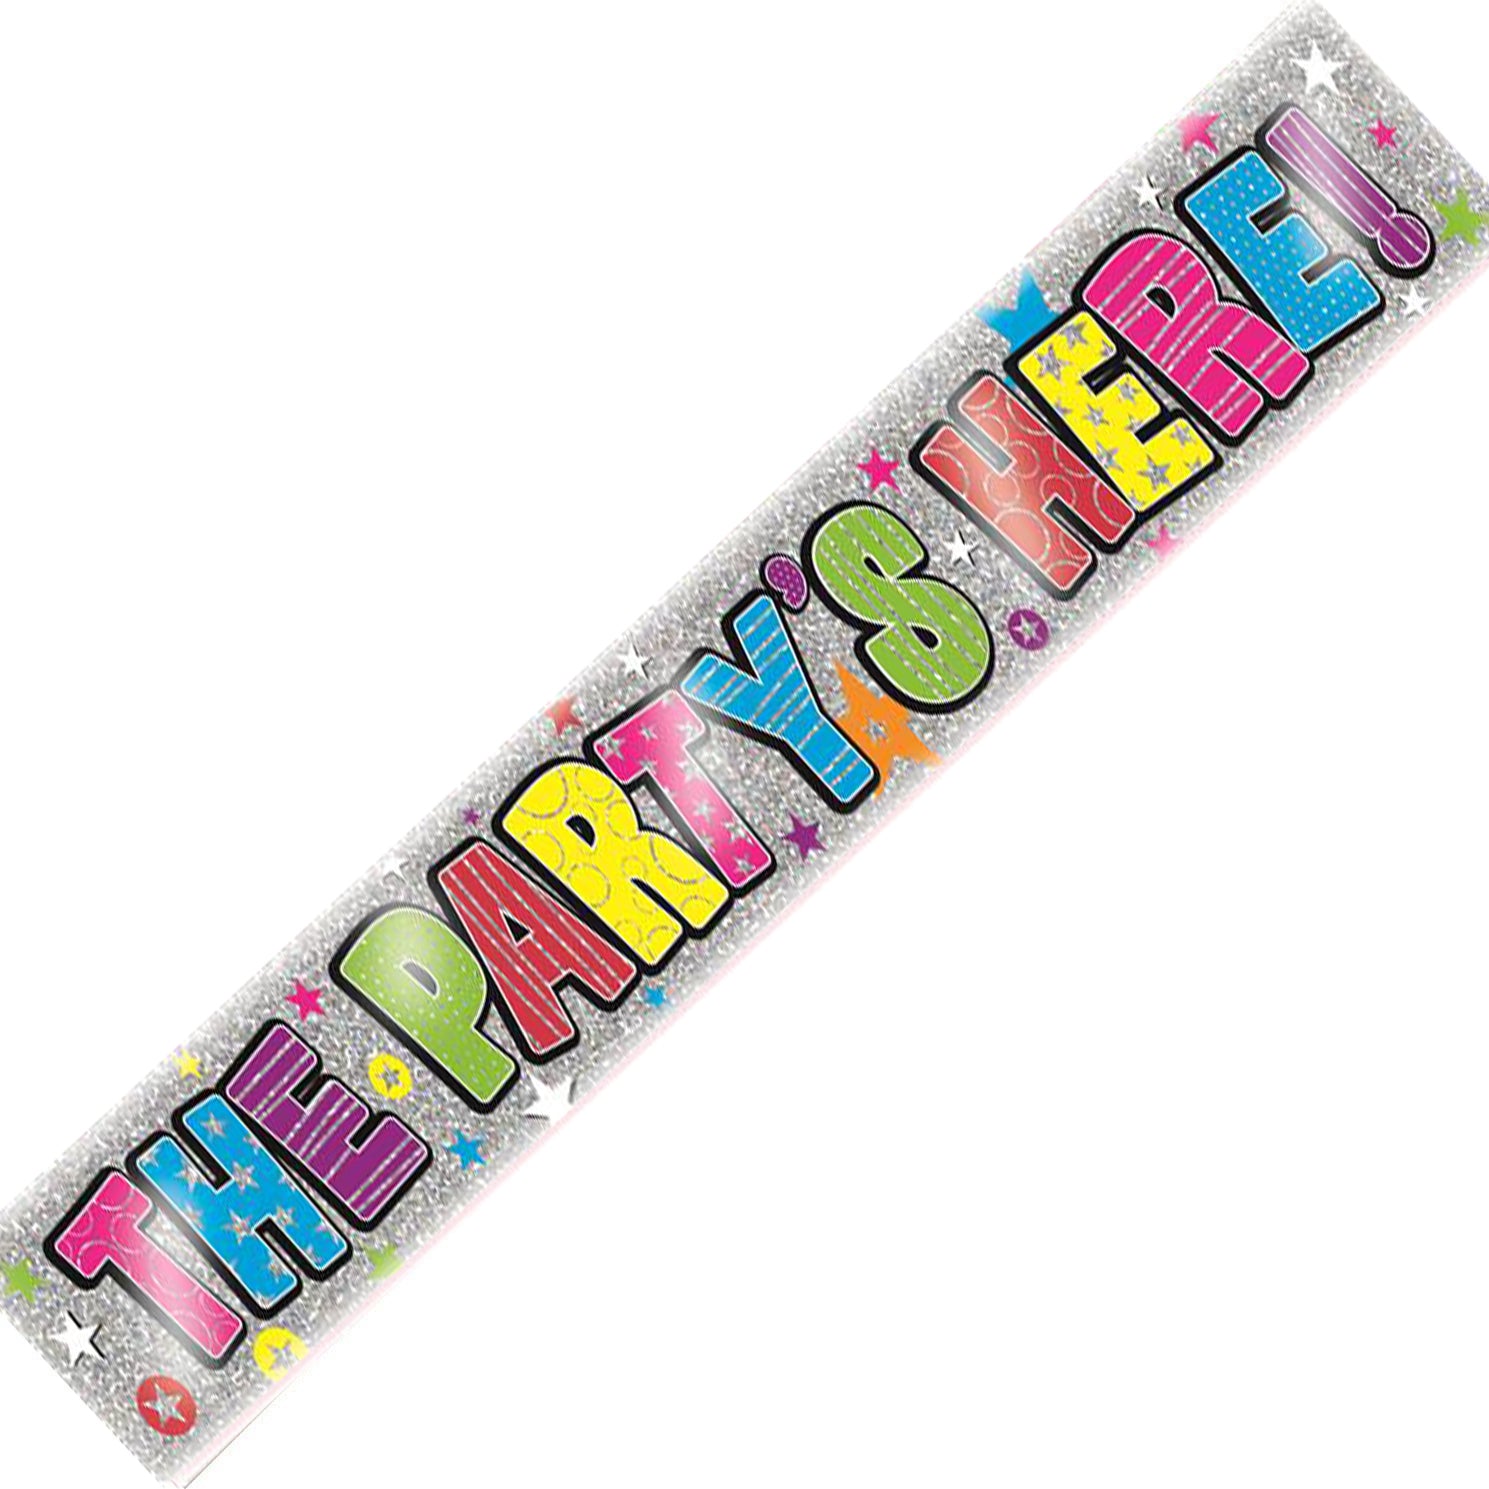 The Party Is Here Holographic Recyclable Birthday Party Banner